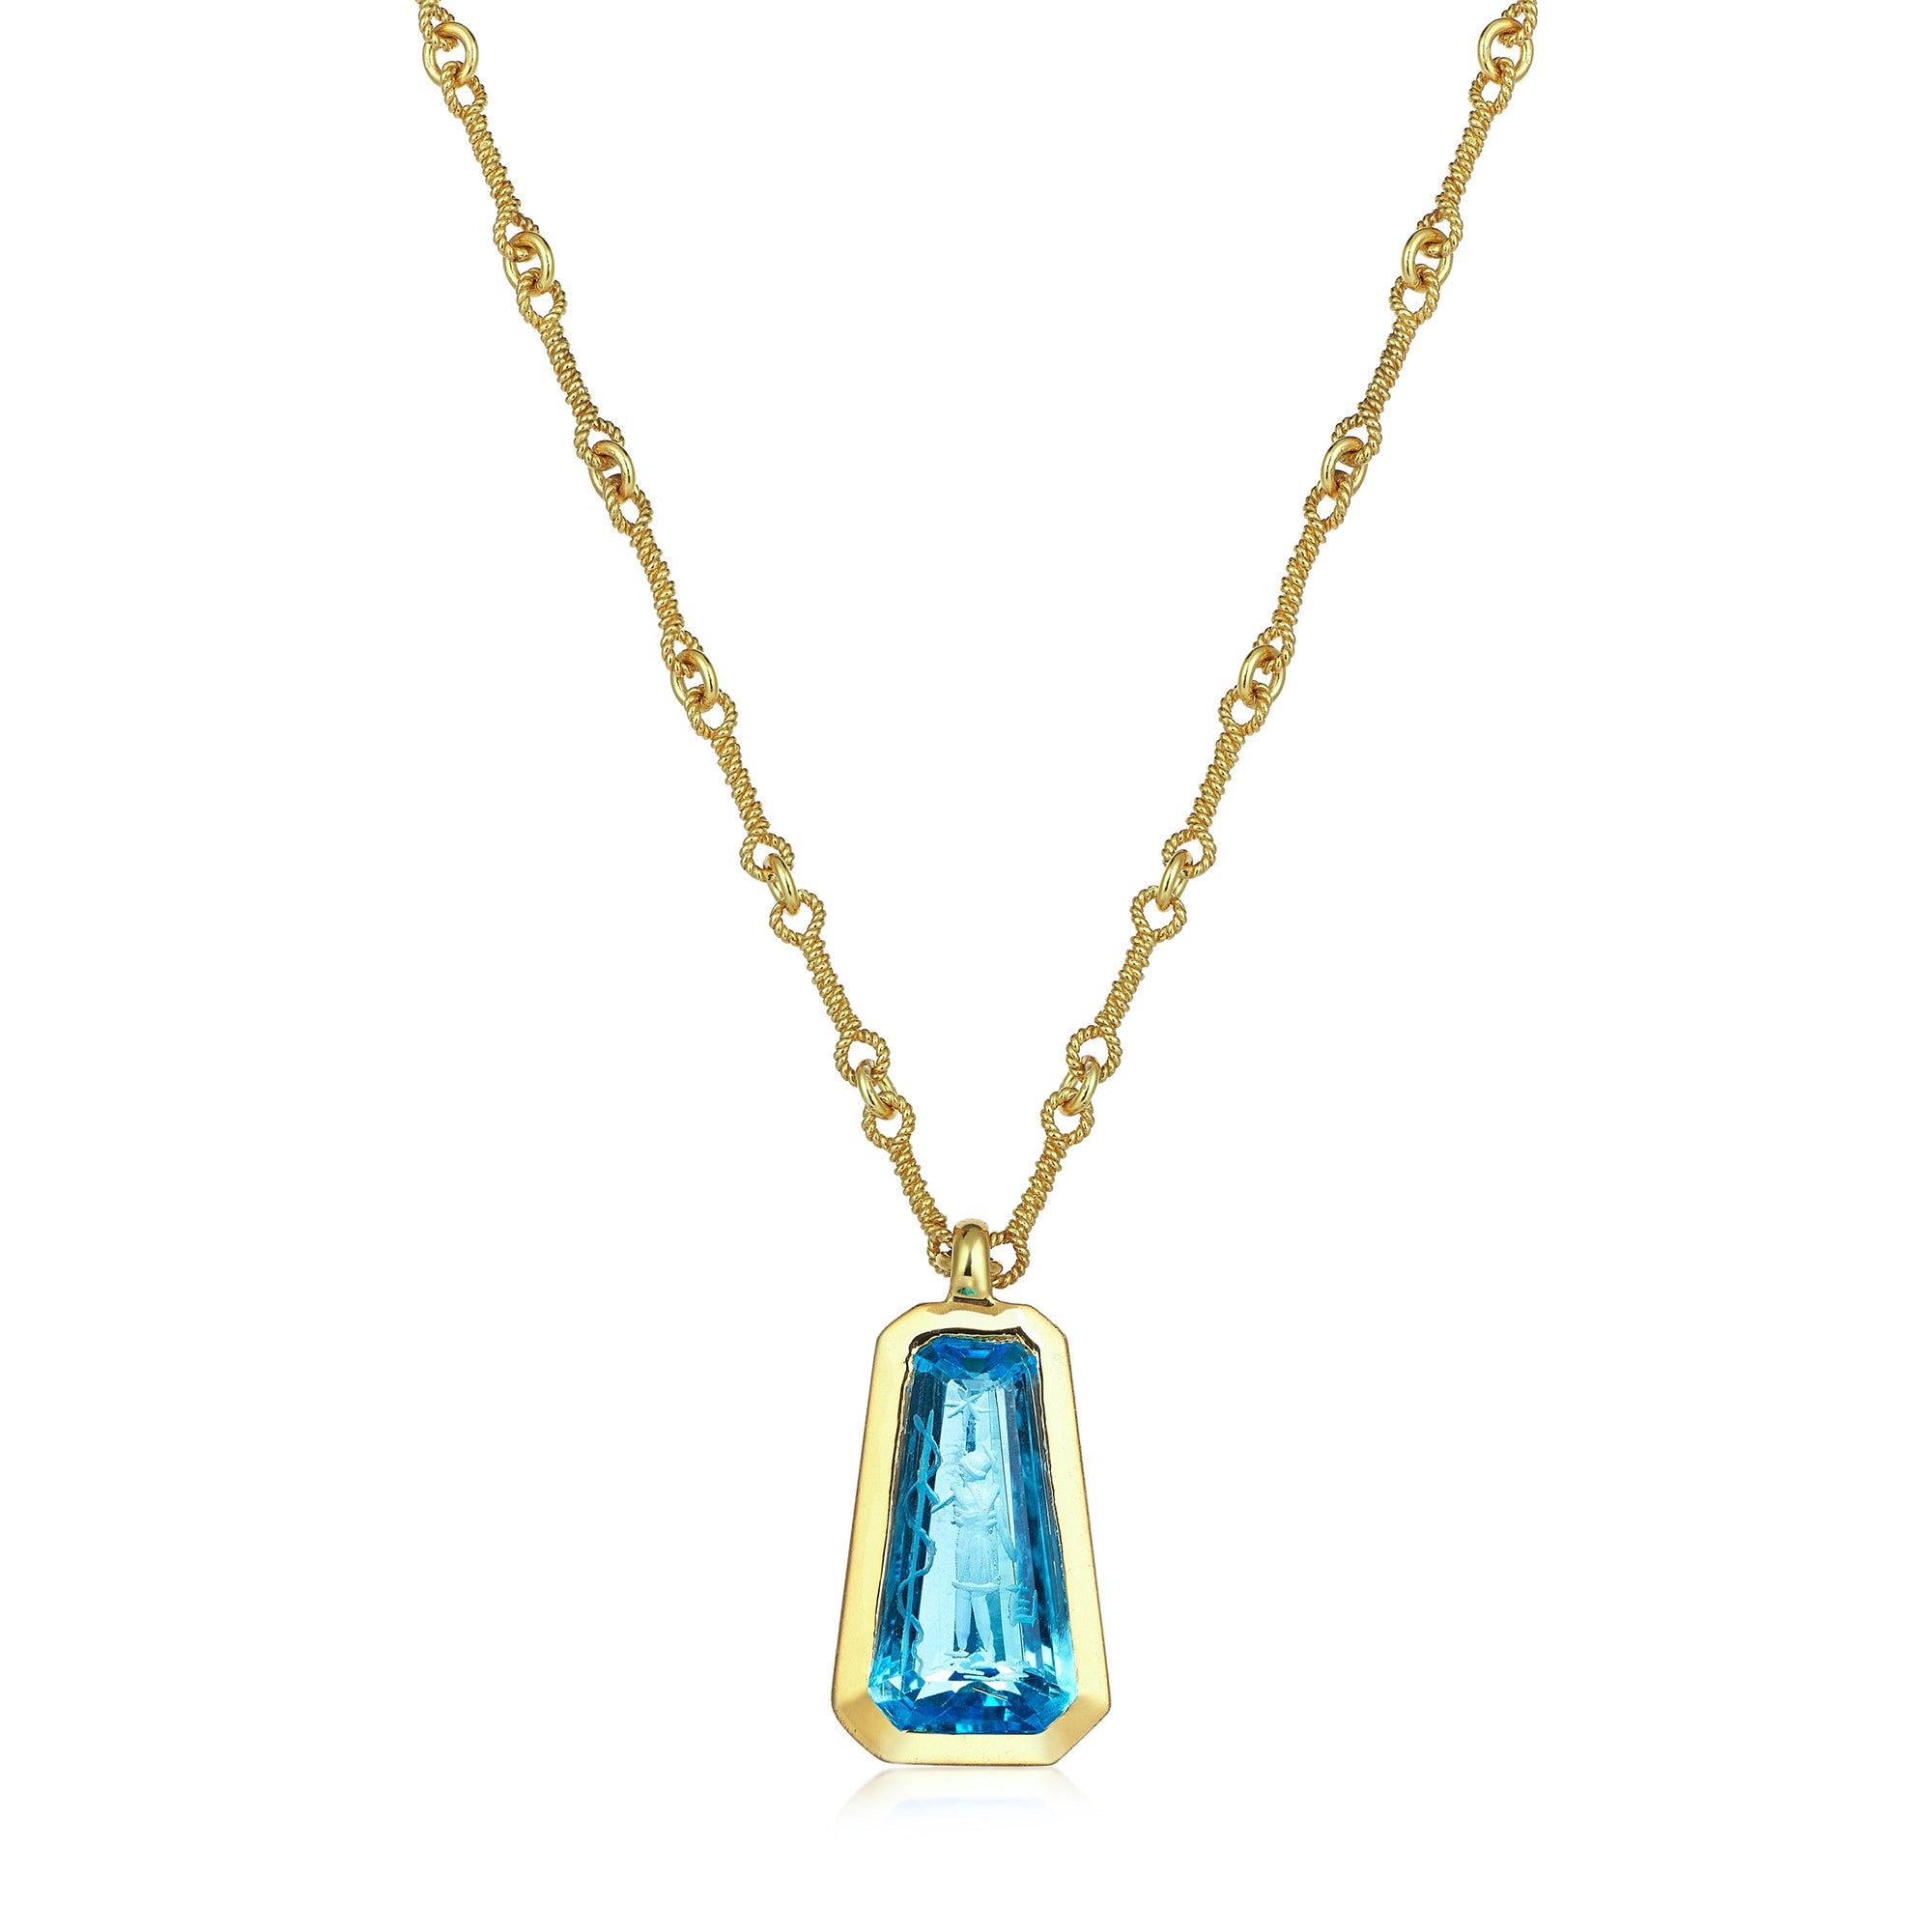 THE BLUE ICE NECKLACE